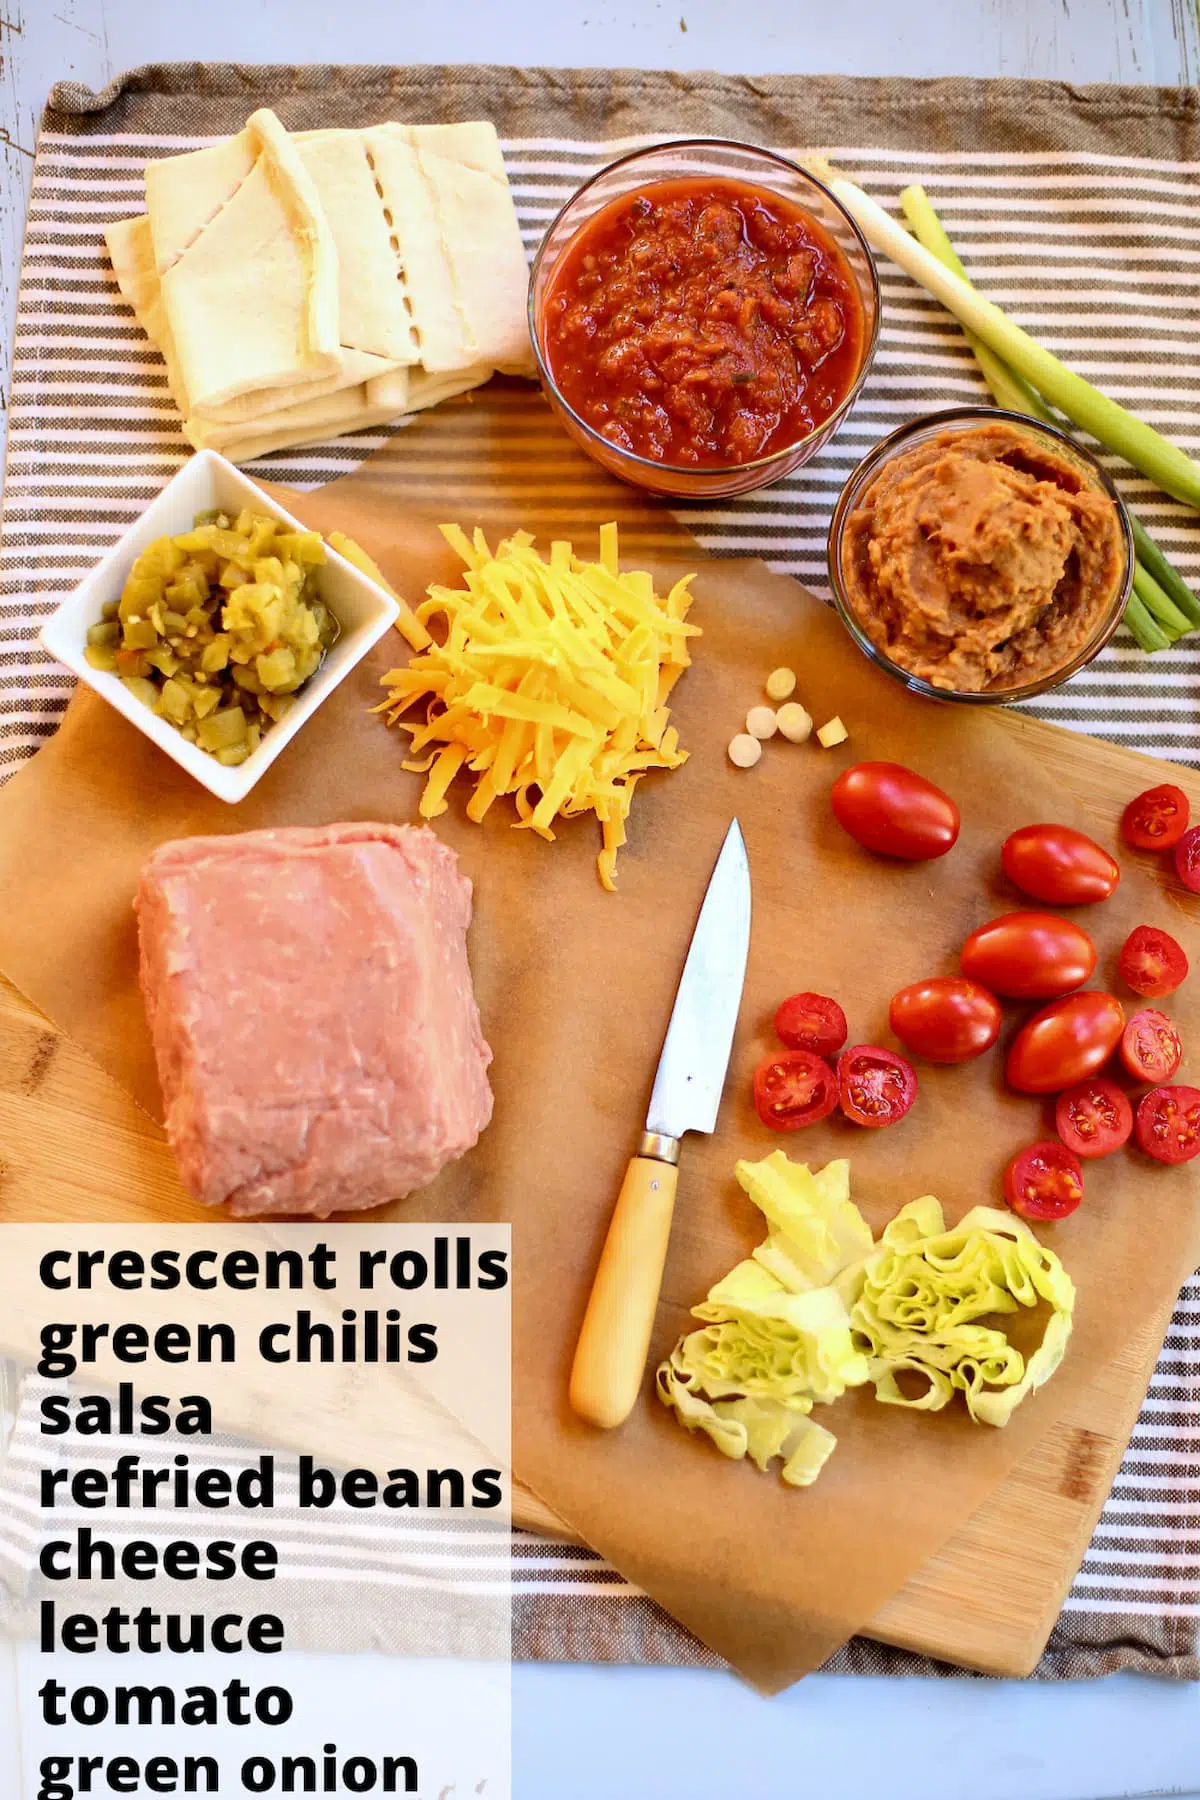 a table with ingredients, turkey, cheese, chiliss, tomatoes and more, with a text overlay of the names of the ingredients.